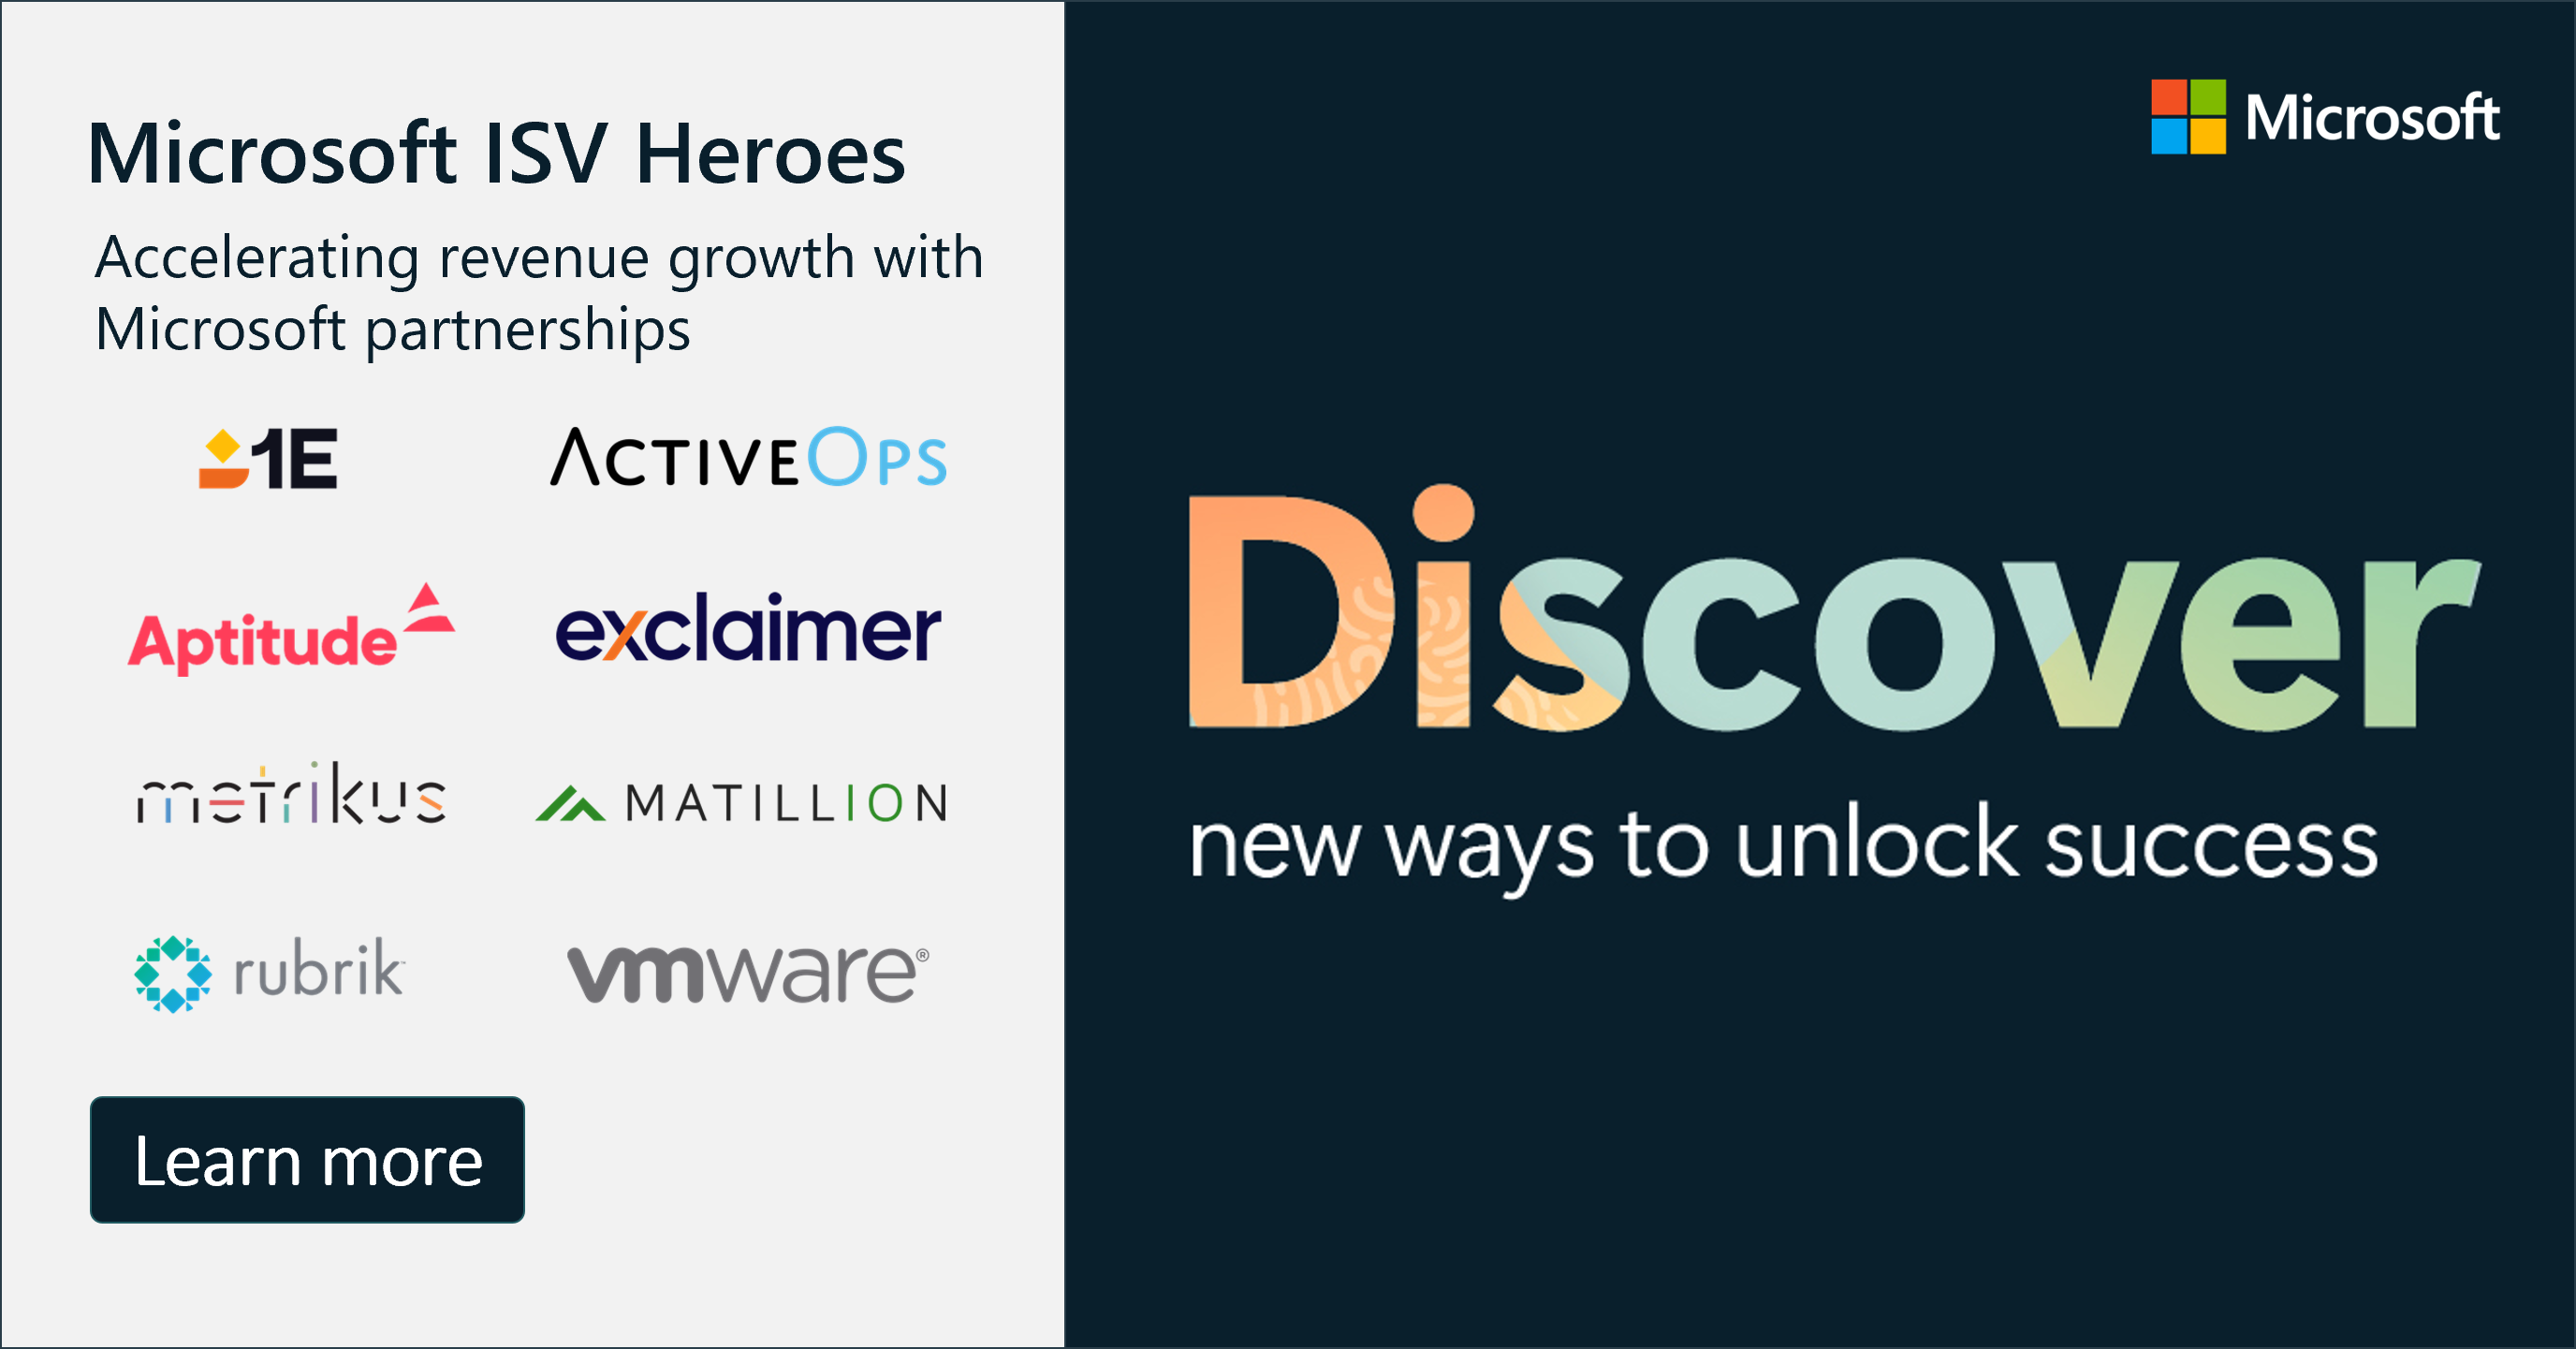 ISV Heroes, Discover new ways to unlock success. Accelerating revenue growth with Microsoft partnerships